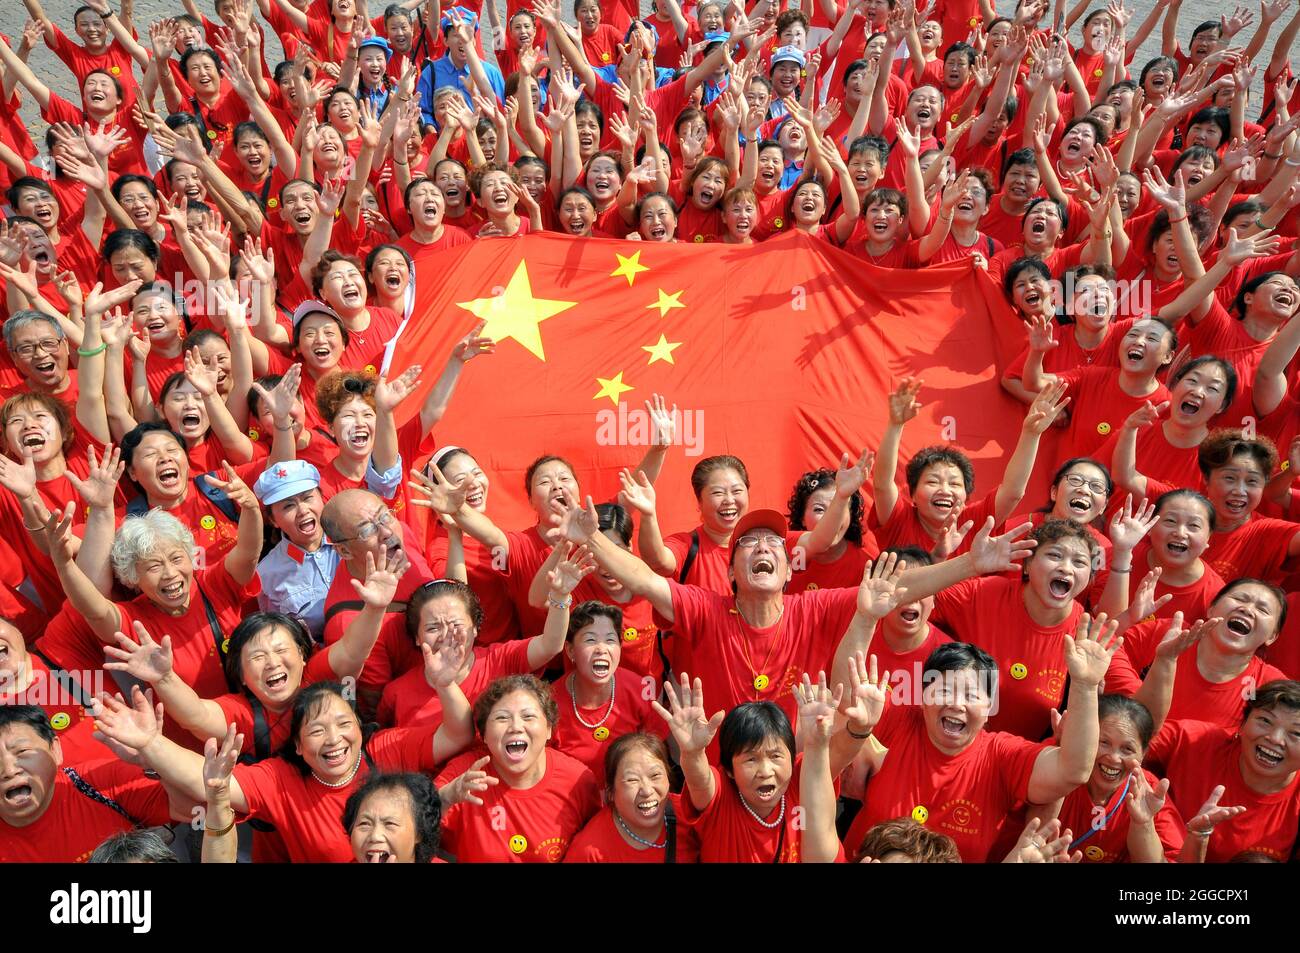 Local Chinese citizens surrounding the Chinese national flag laugh during a laughing campaign to celebrate the upcoming National Day, marking the 60th Stock Photo